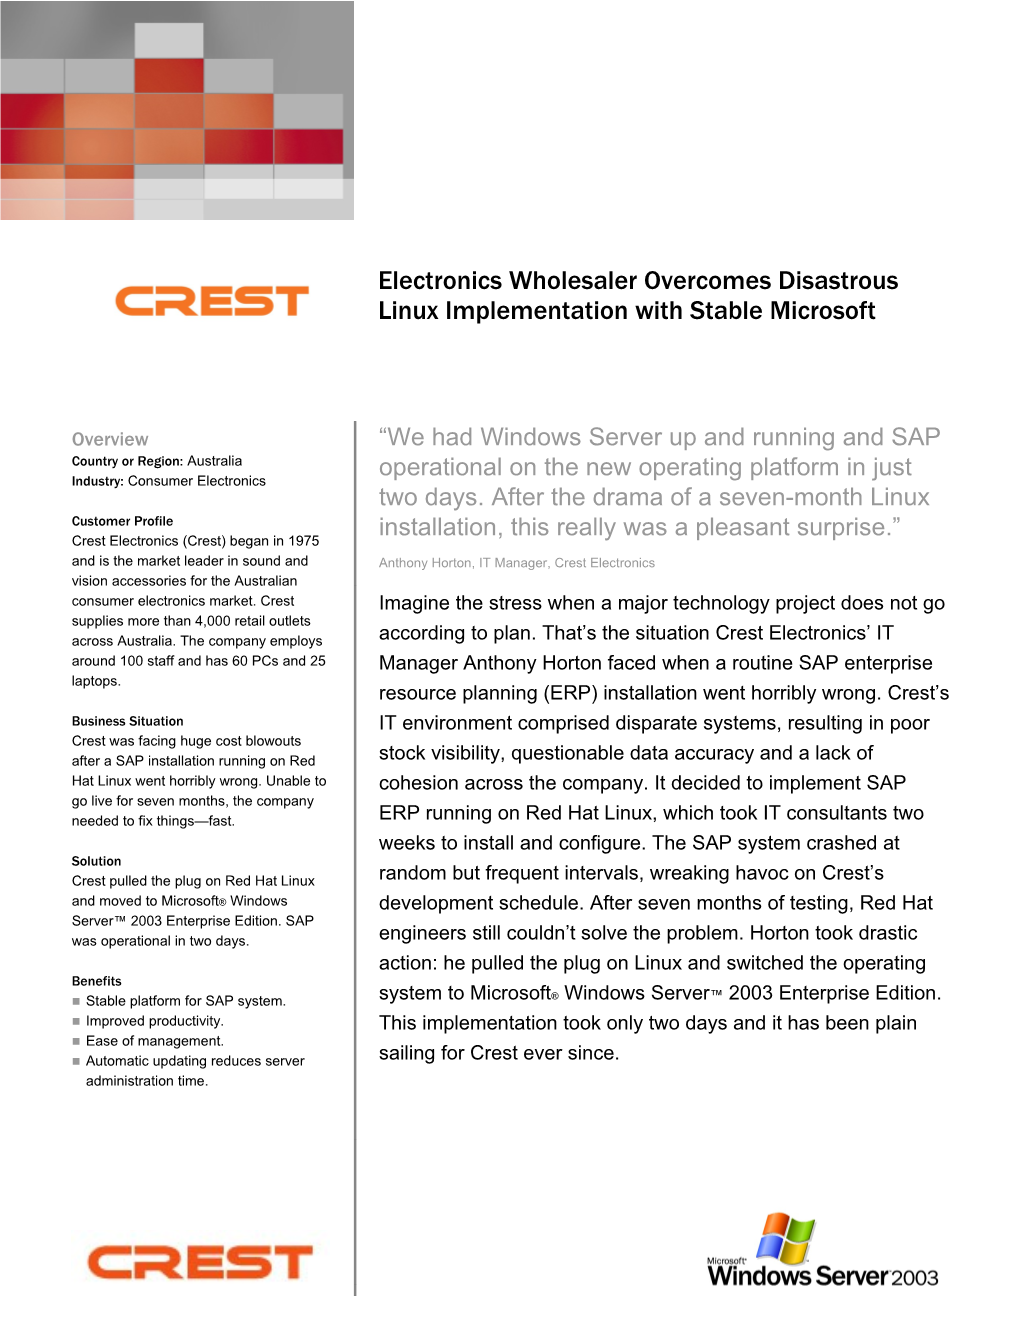 Electronics Wholesaler Overcomes Disastrous Linux Implementation with Stable Microsoft